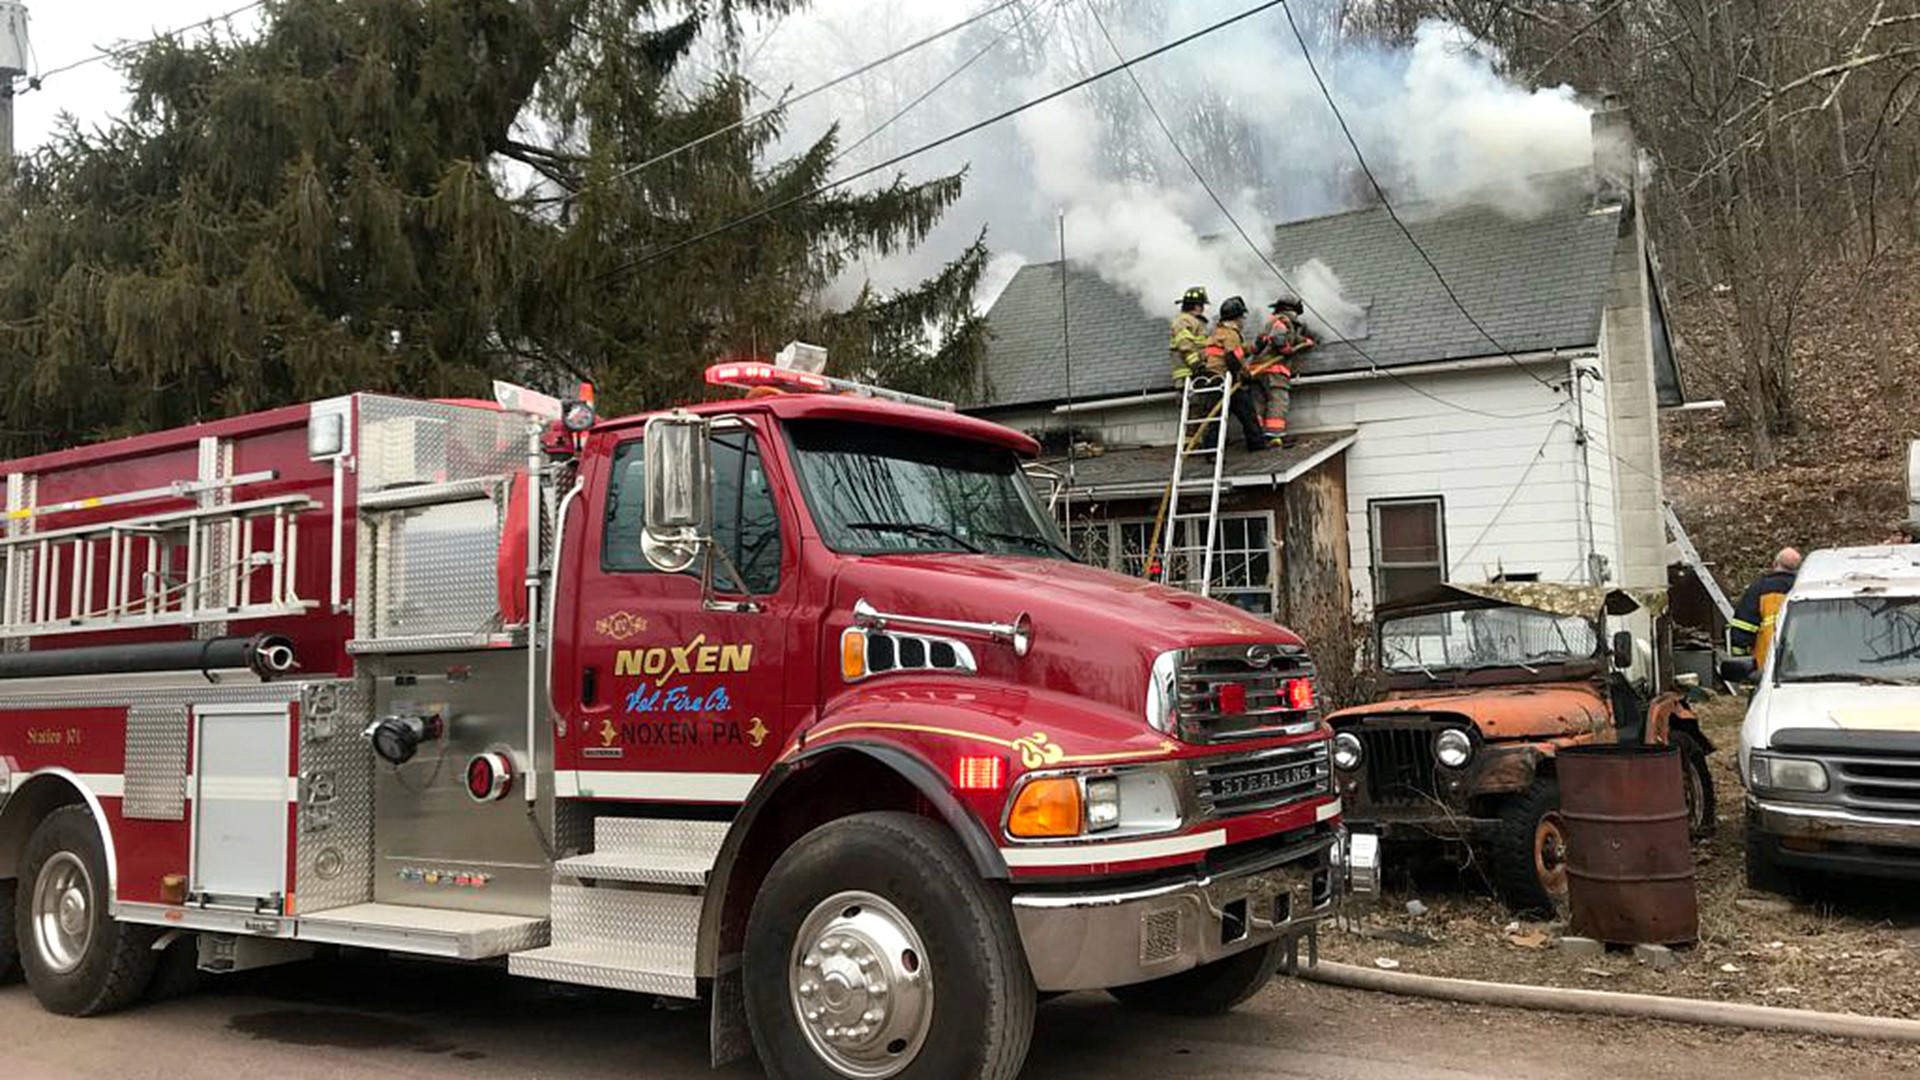 Home in Wyoming County Hit by Fire